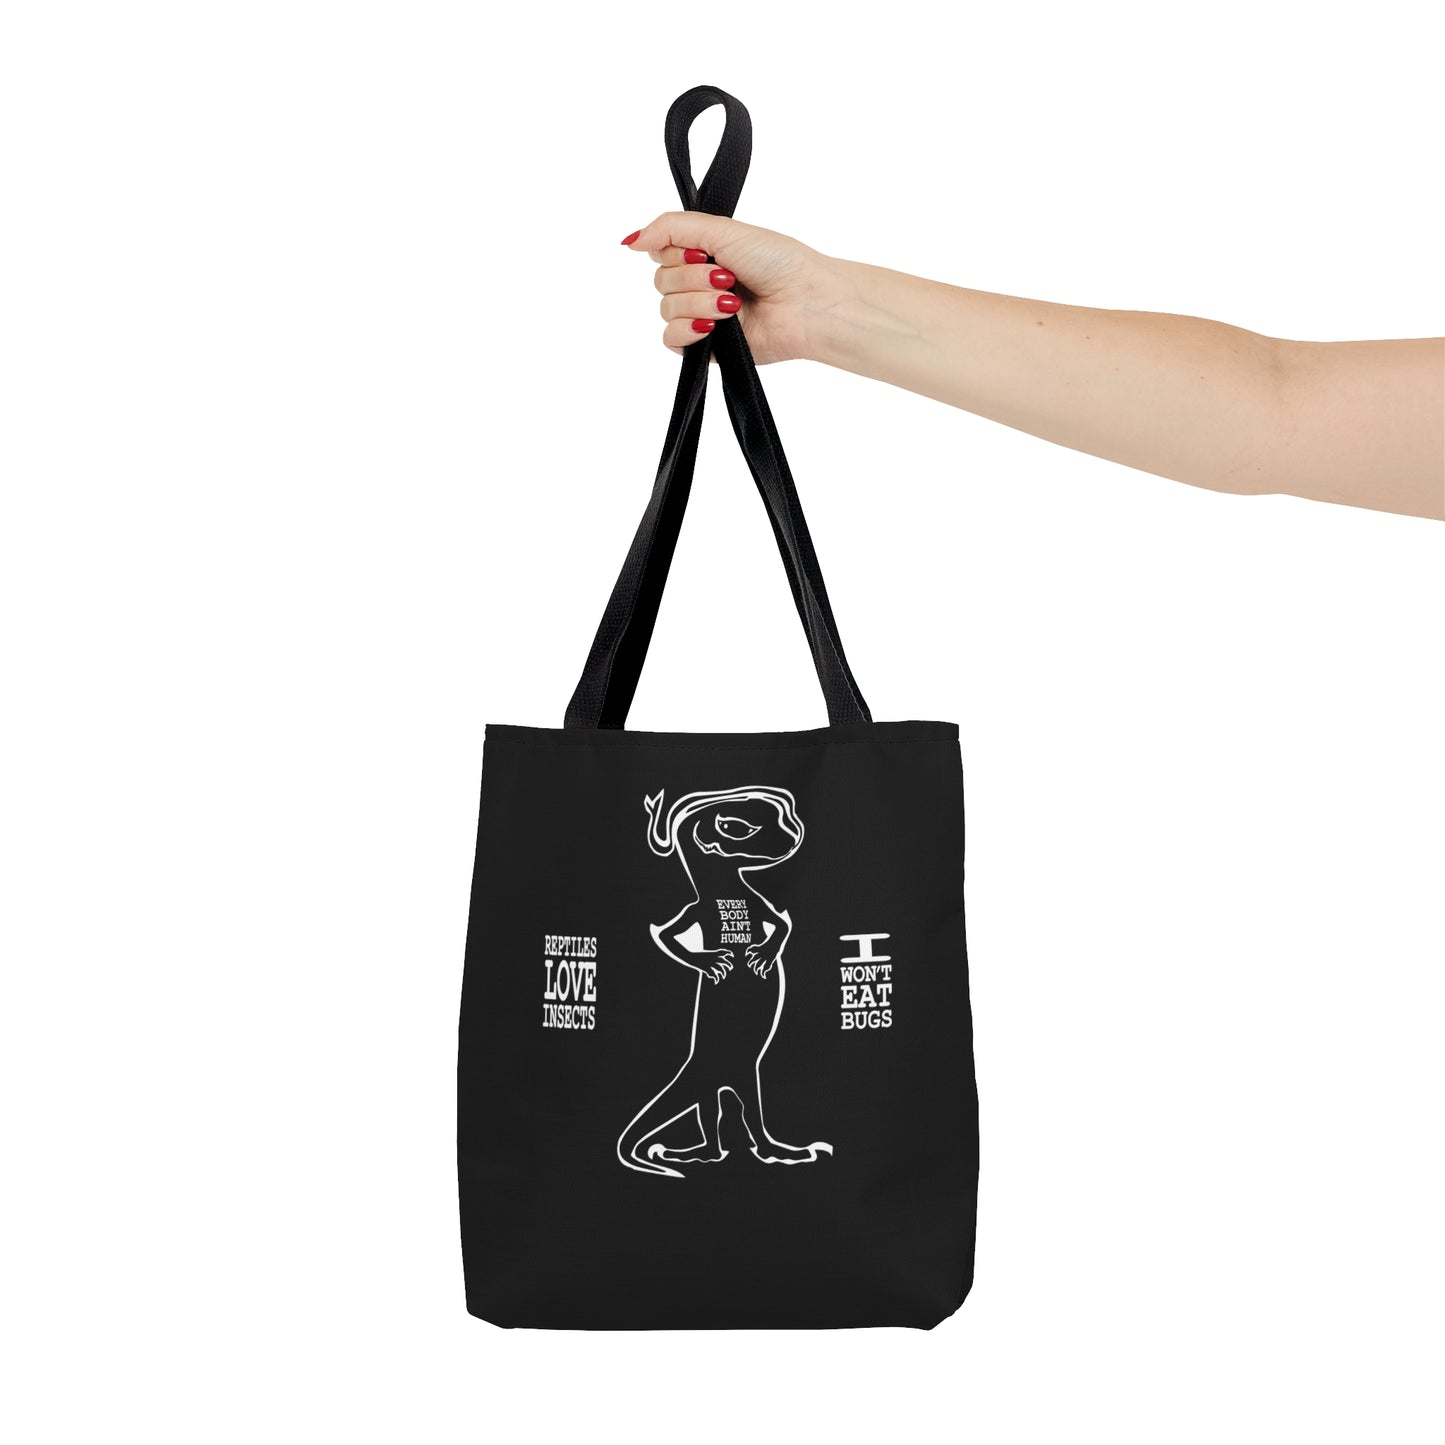 UNO 2THEREPUBLIC EVERYBODY AIN'T HUMAN Tote Bag (AOP)